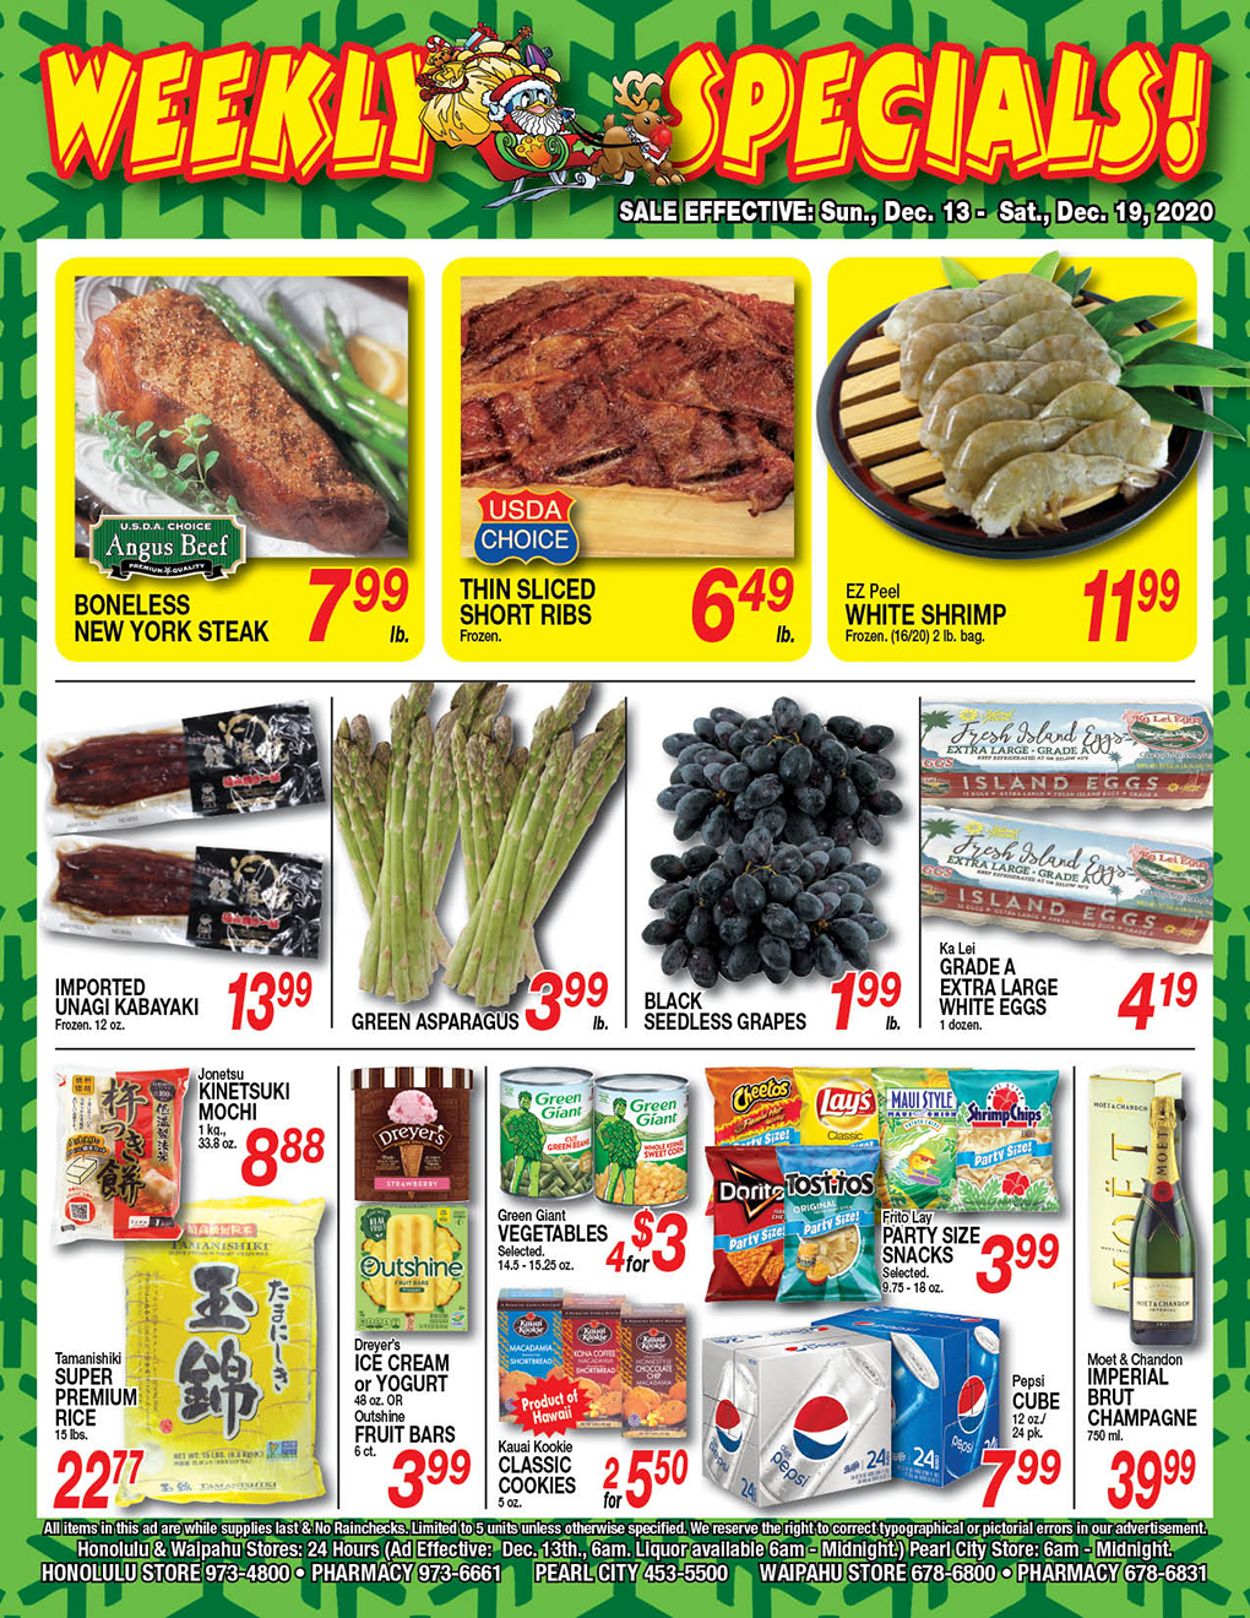 Don Quijote Hawaii Current weekly ad 12/13 12/19/2020 frequent ads com